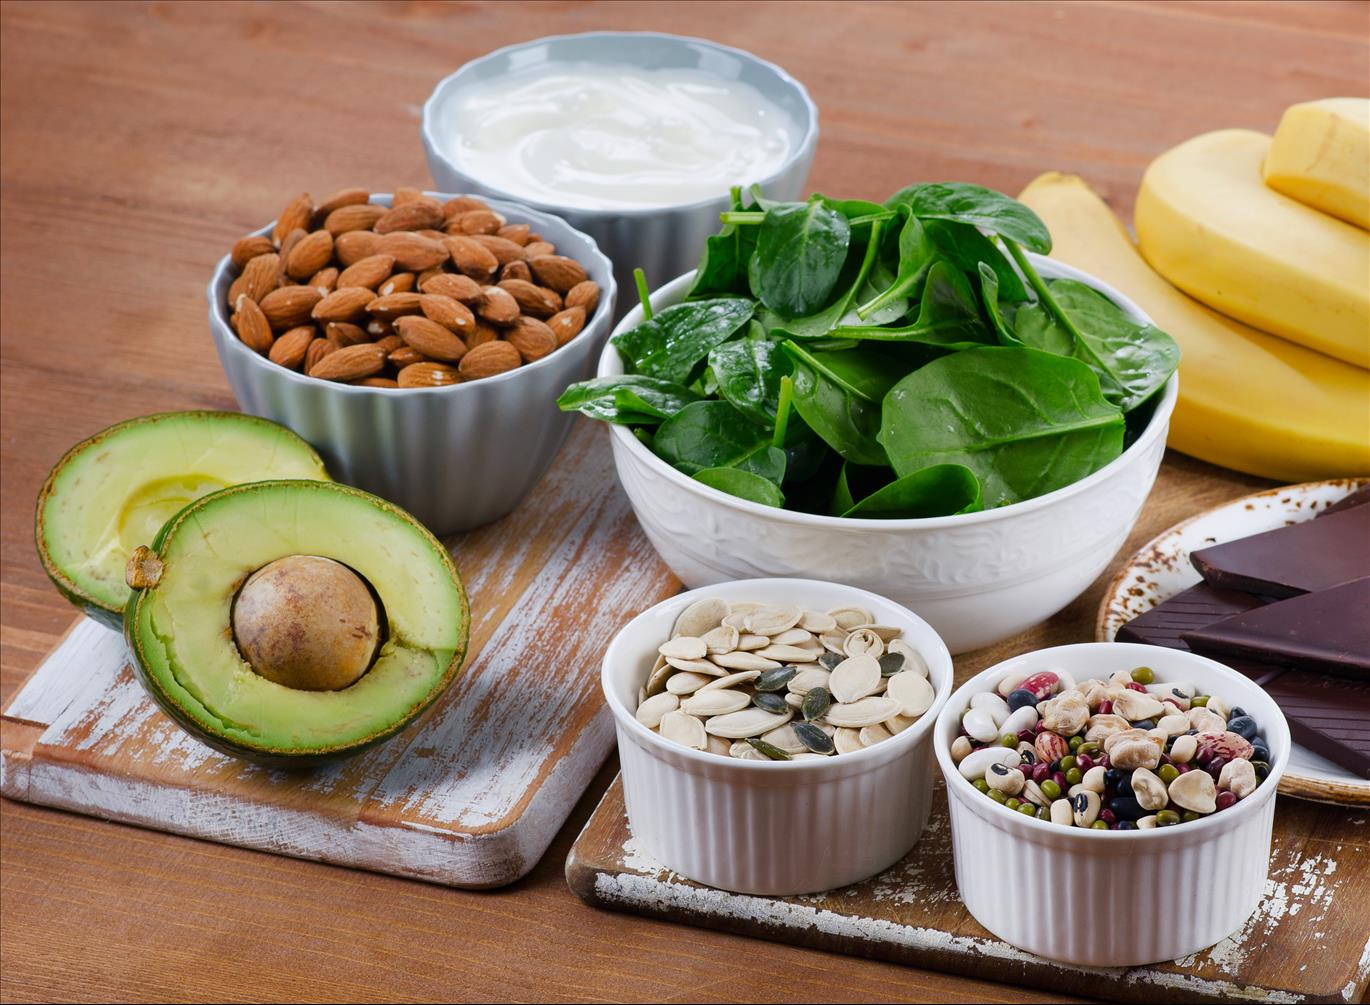 Magnesium: What You Need To Know About This Important Micronutrient